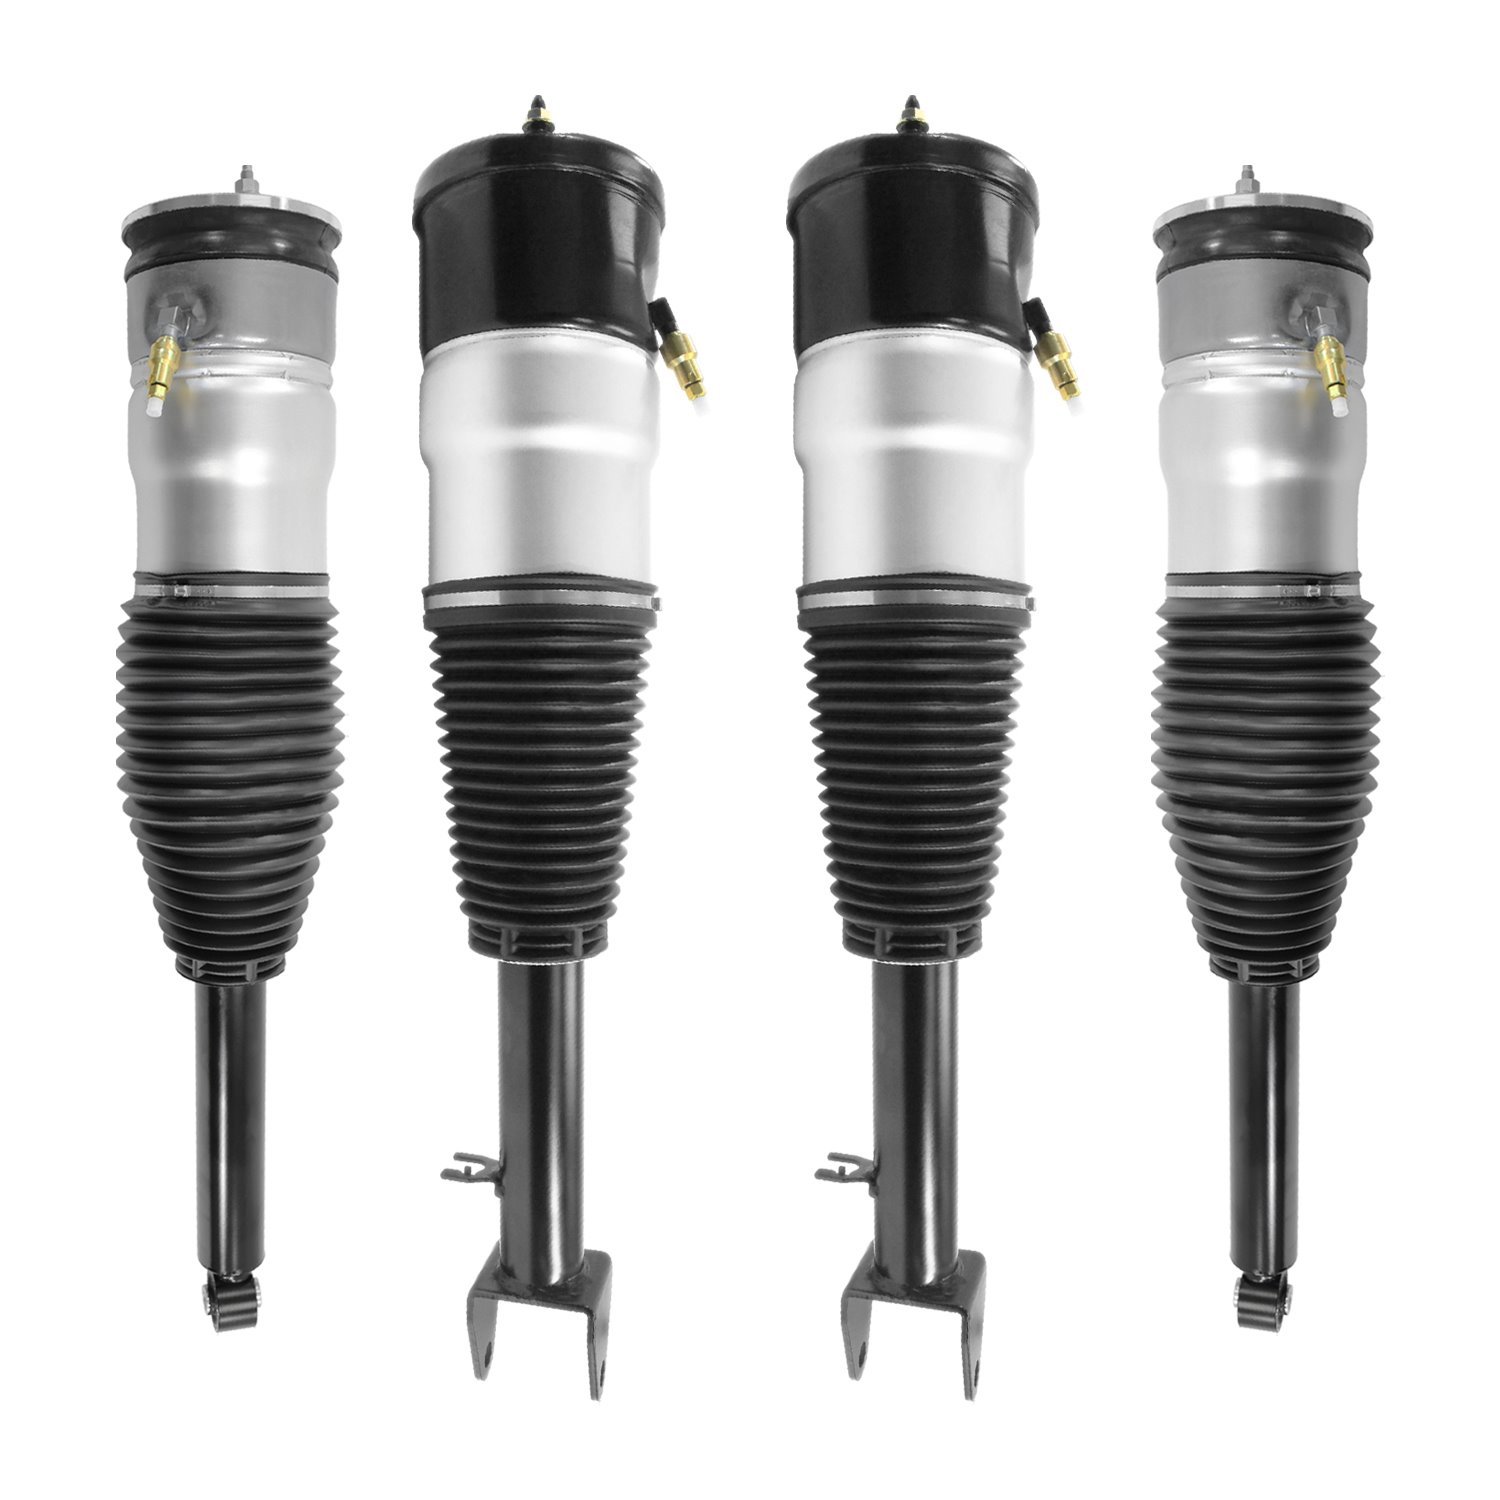 4-18-150000-18-550000 Non-Electronic Suspension Air Strut Assembly Kit Fits Select Tesla S